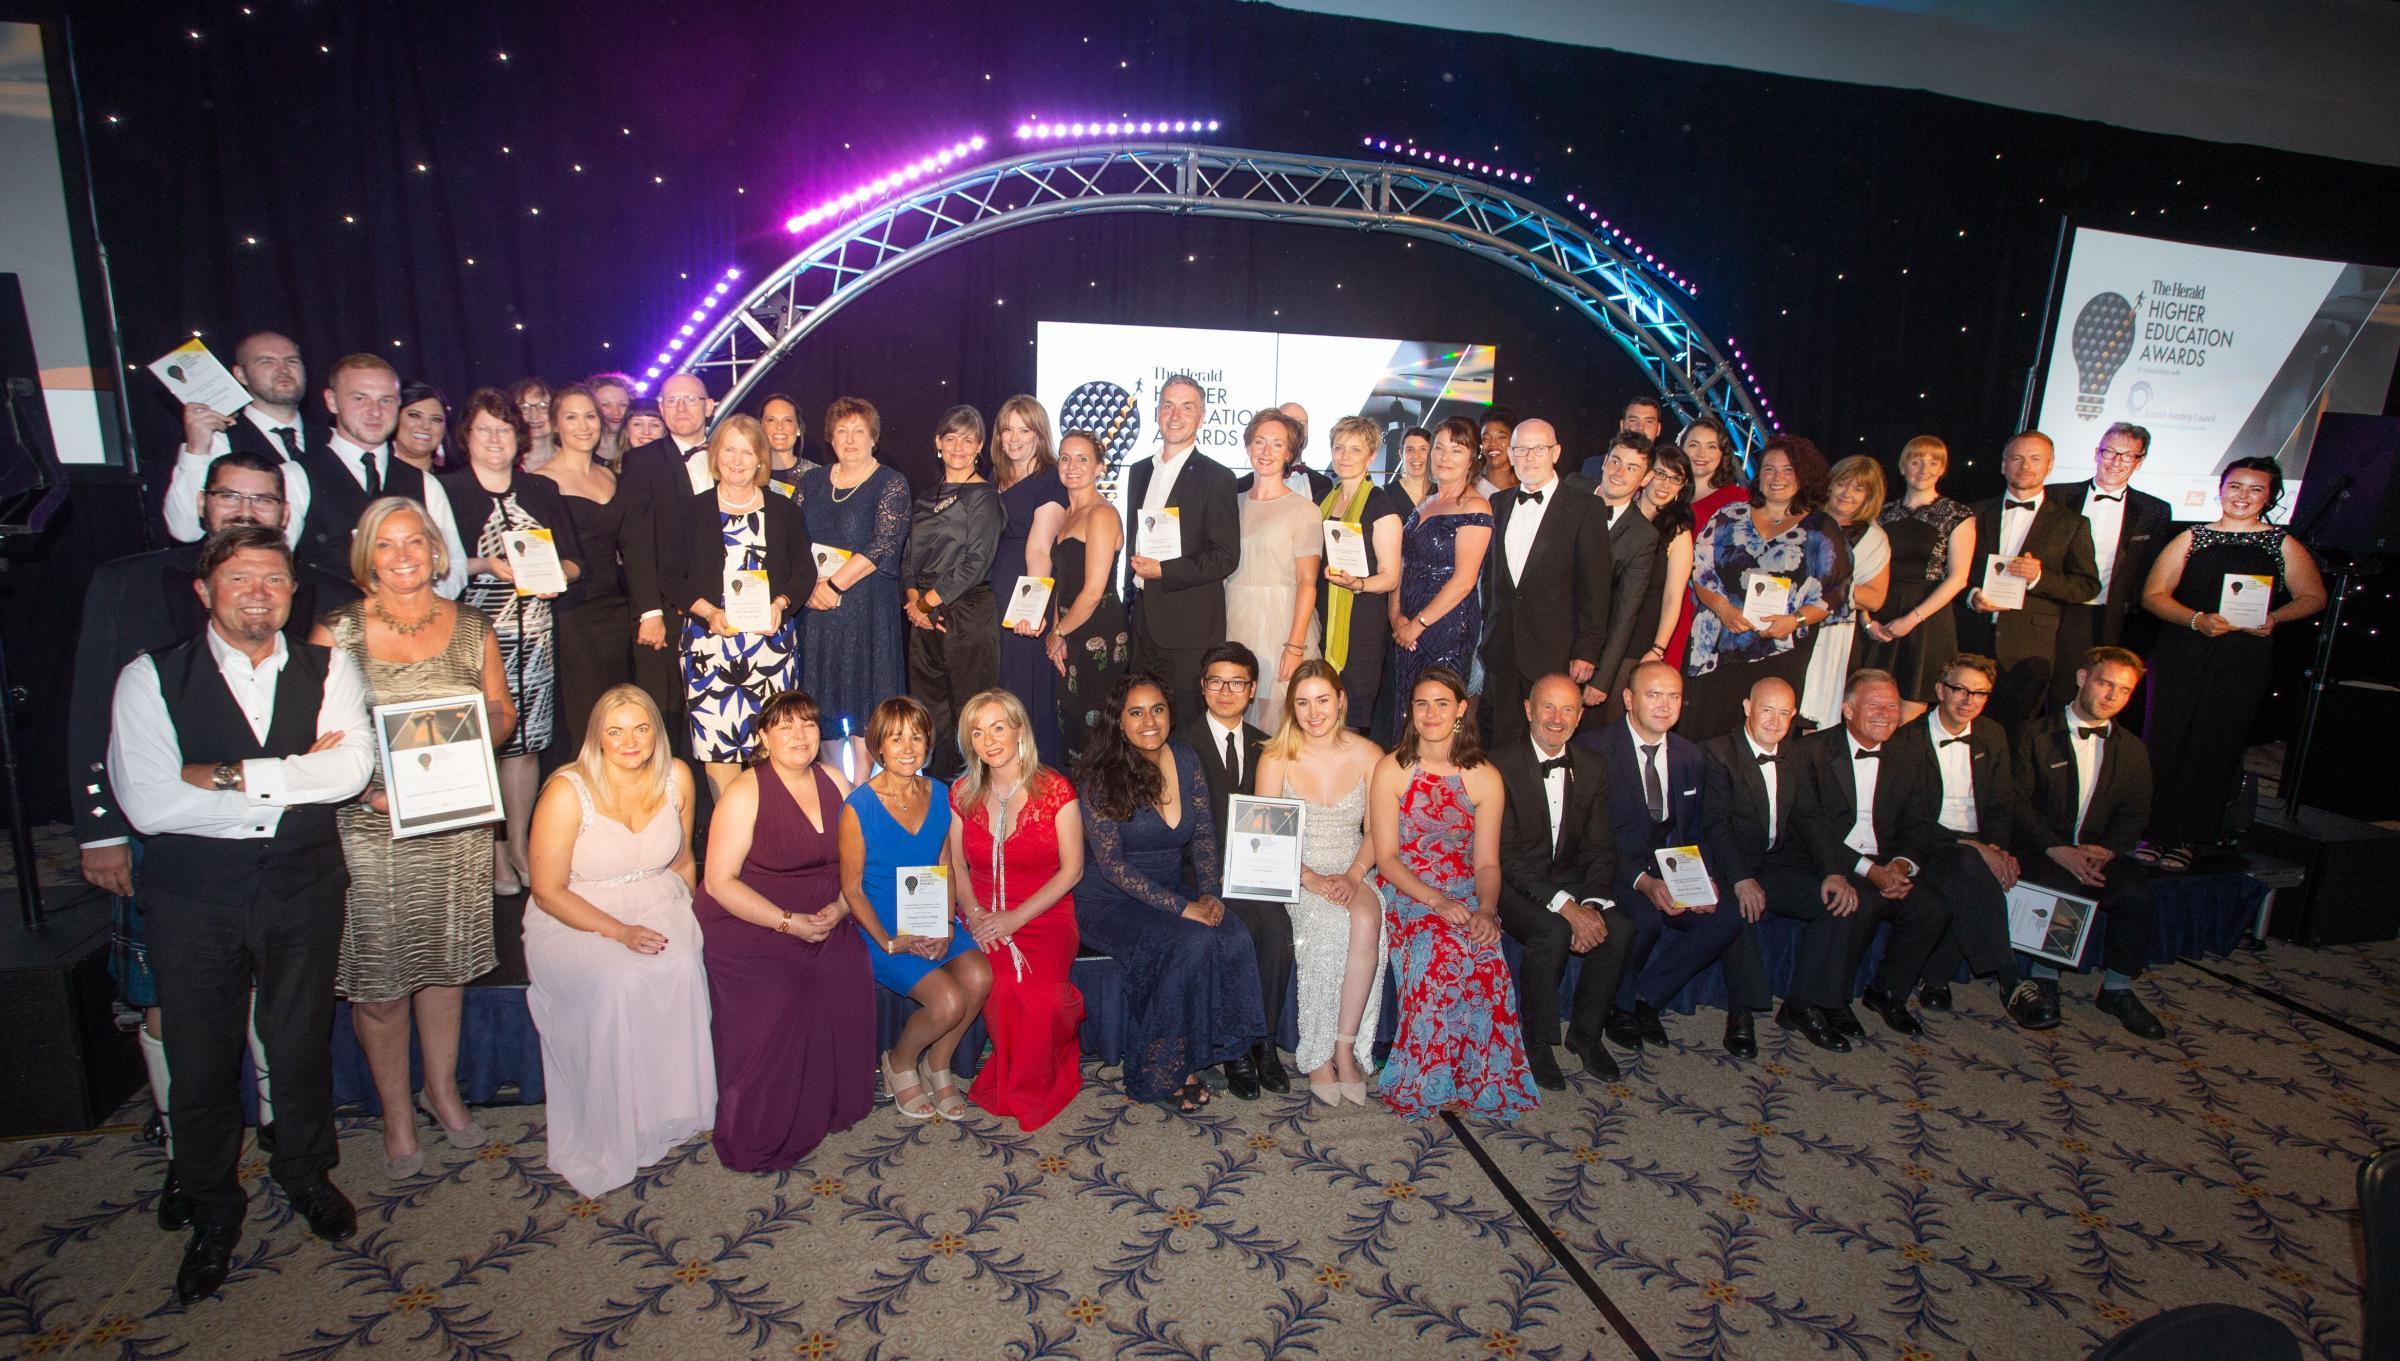 Last chance for institutions to enter Higher Education Awards